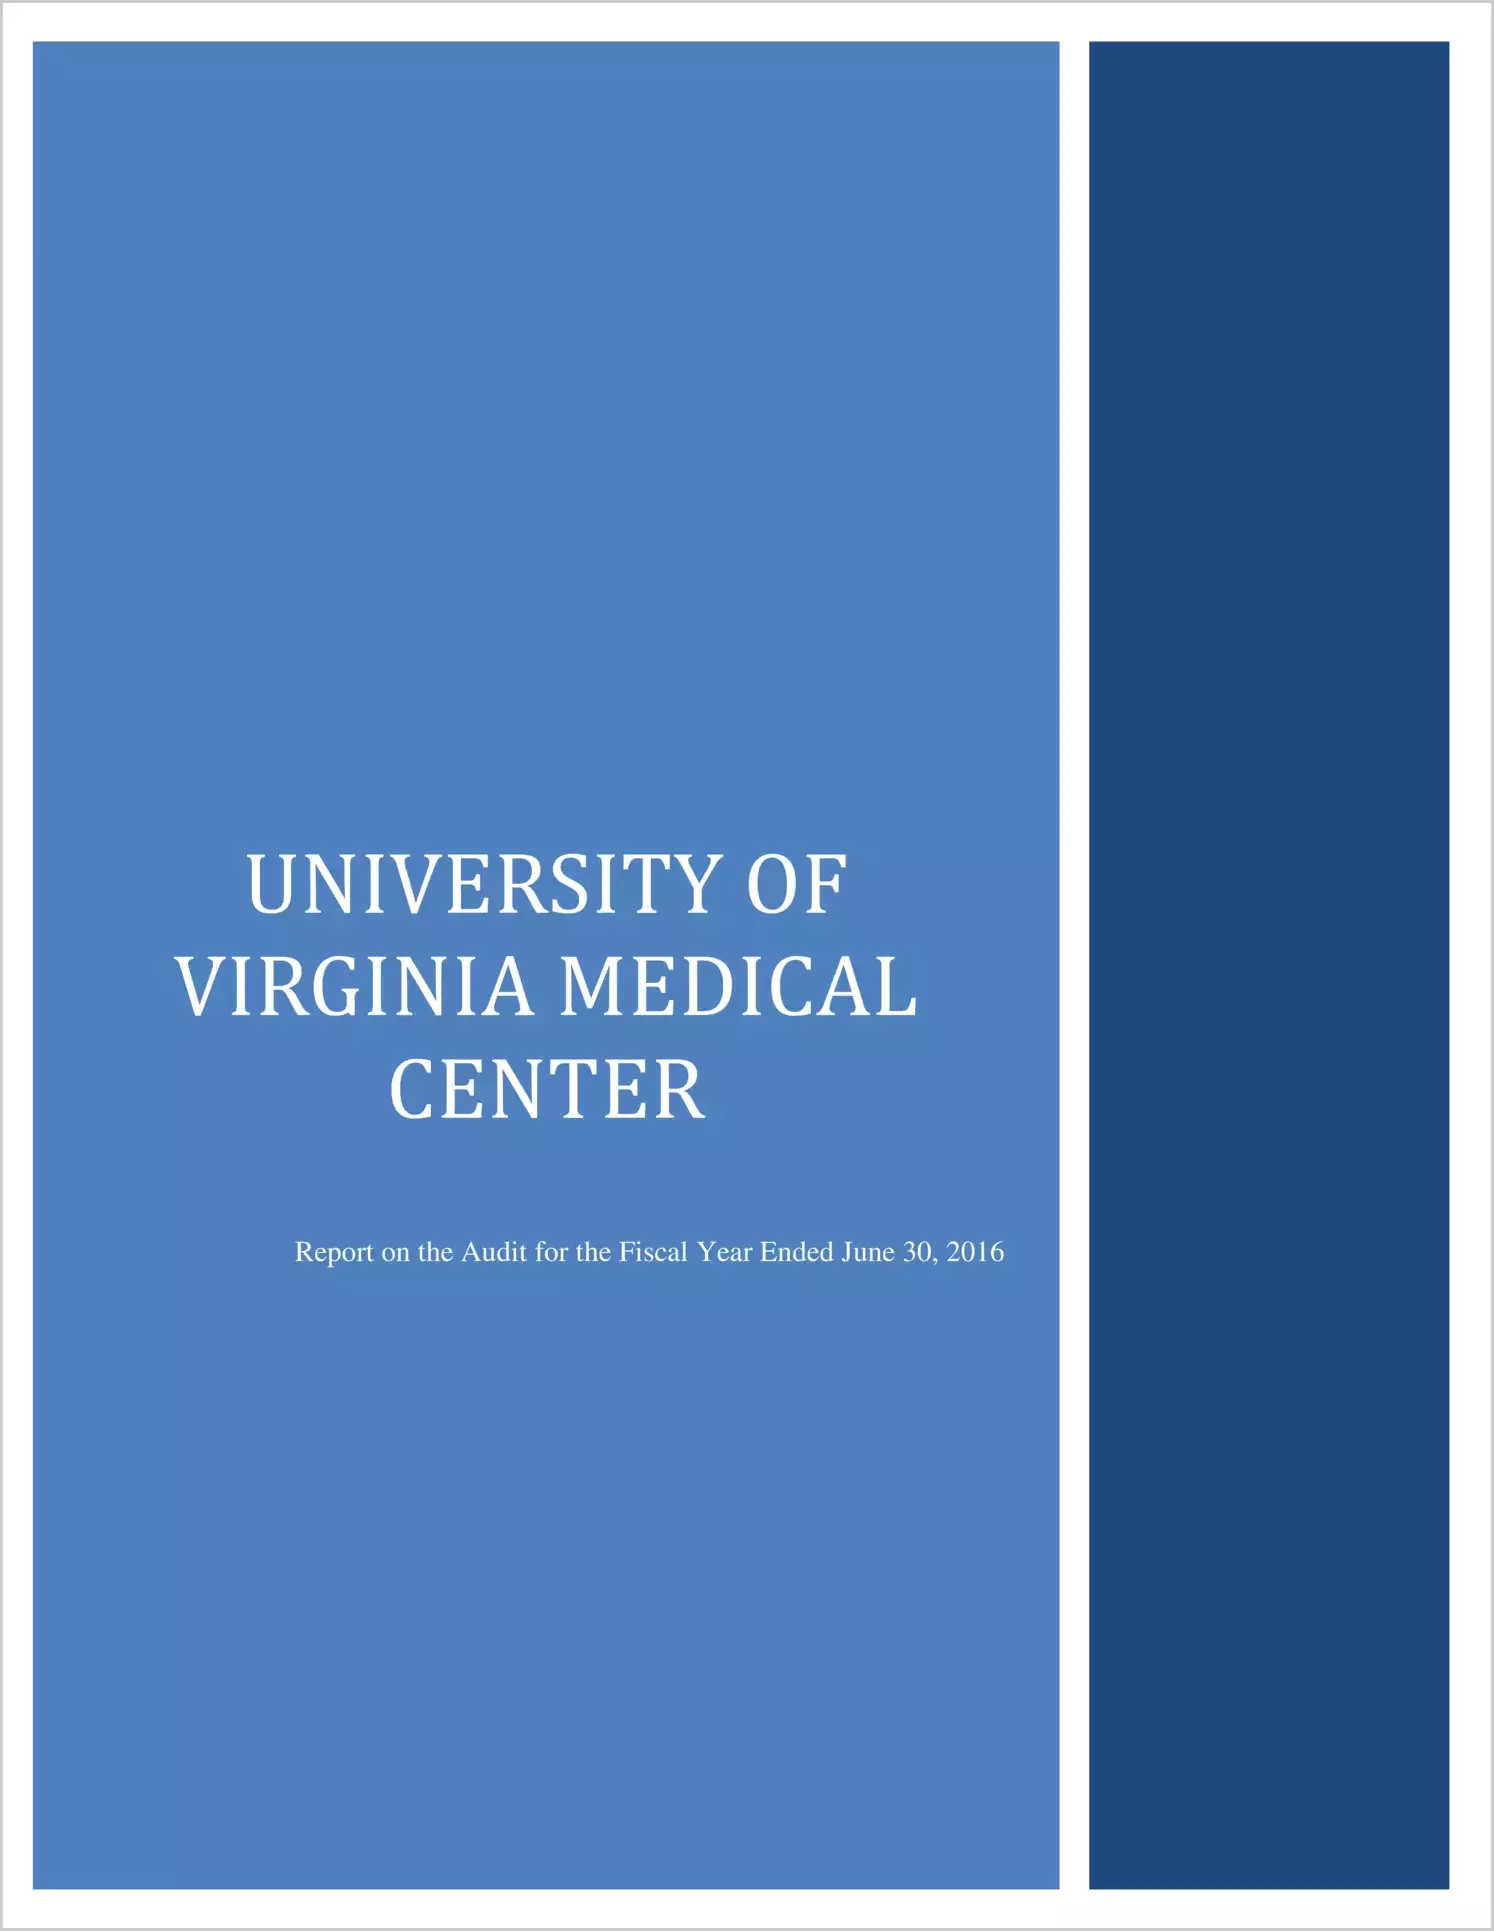 University of Virginia Medical Center Finanical Statement for the year ended June 30, 2016